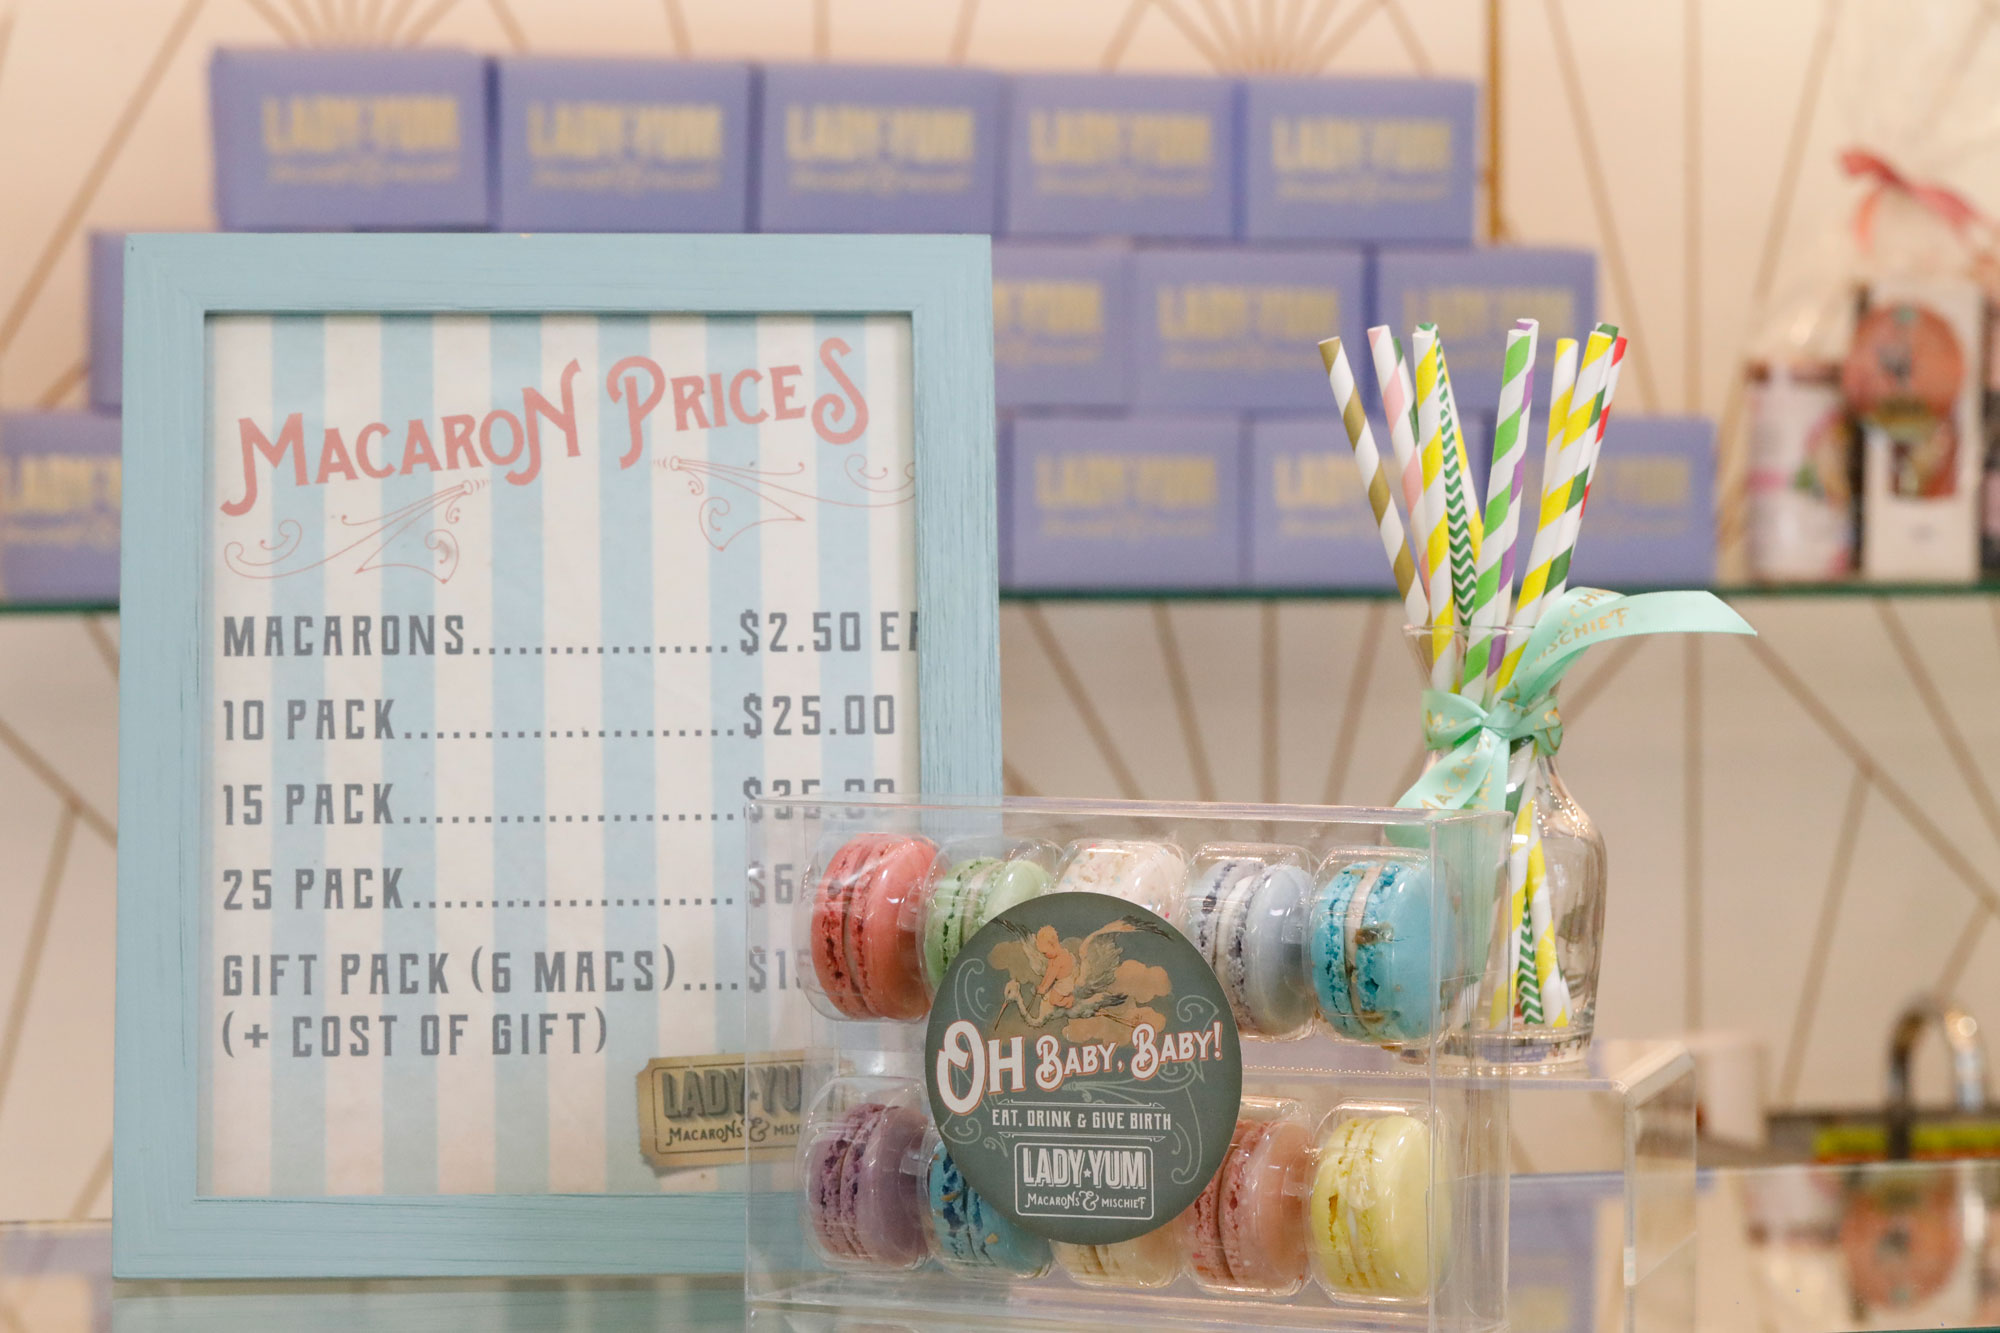 SEA Lady Yum Macaron Price Package Sign